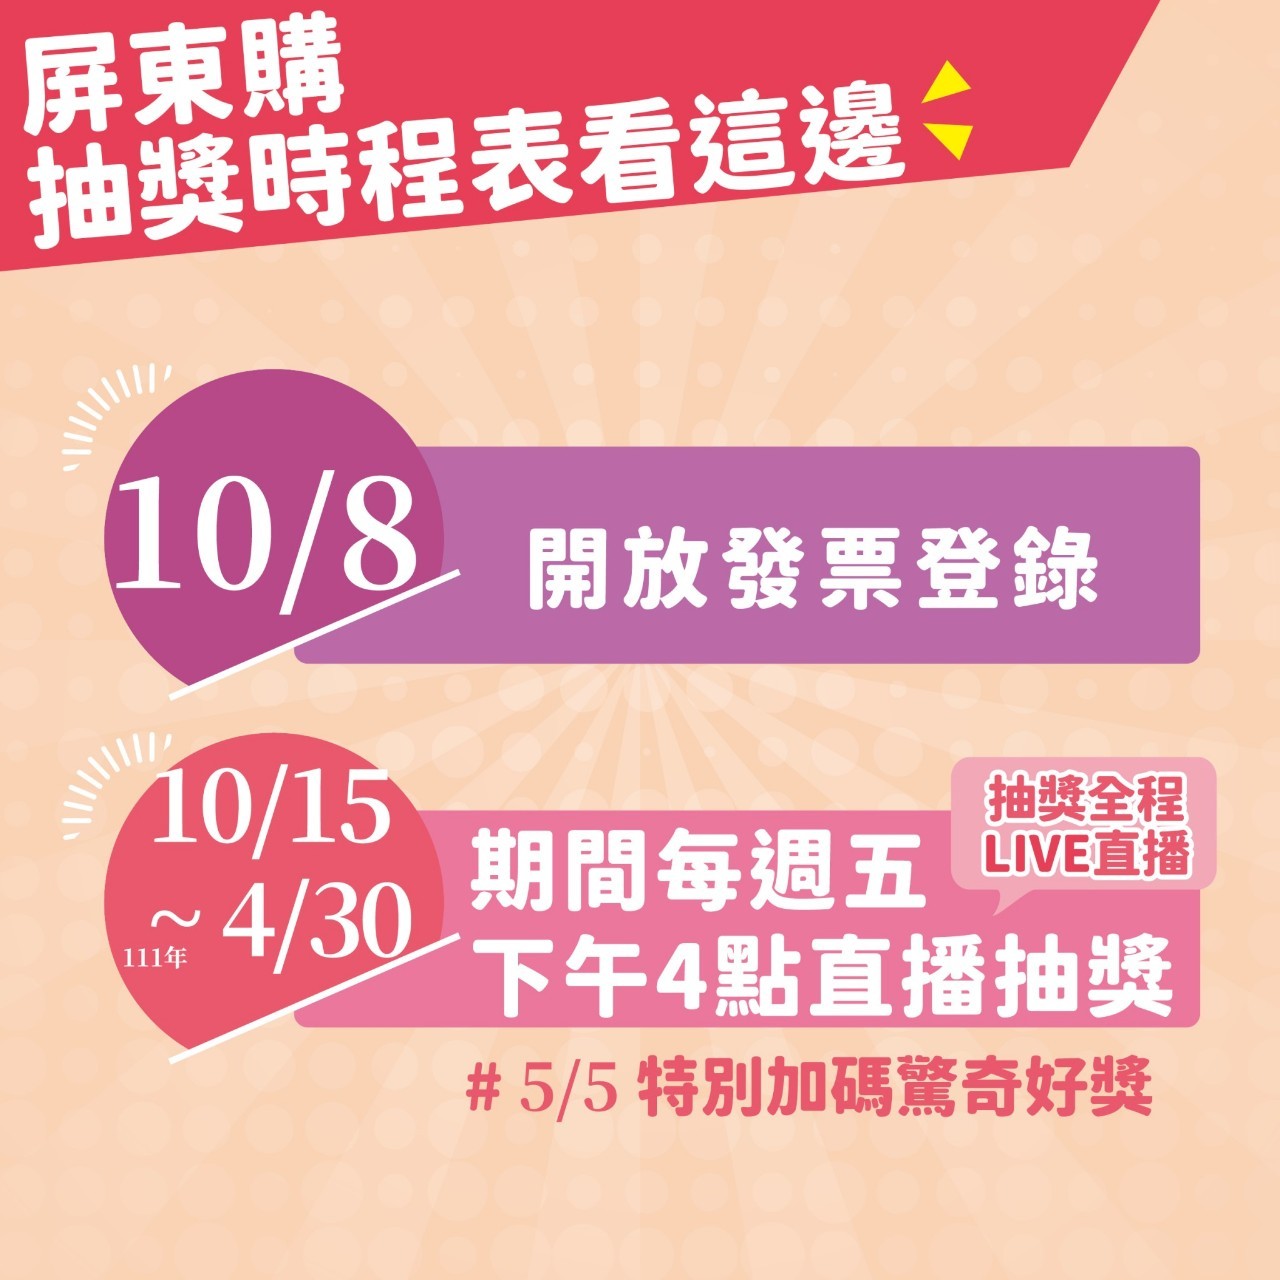 Participate in the “Spend Your Quintuple Stimulus Vouchers in Pingtung and Await You Every Week and Month” activity. (Photo / Provided by the Pingtung County Government)